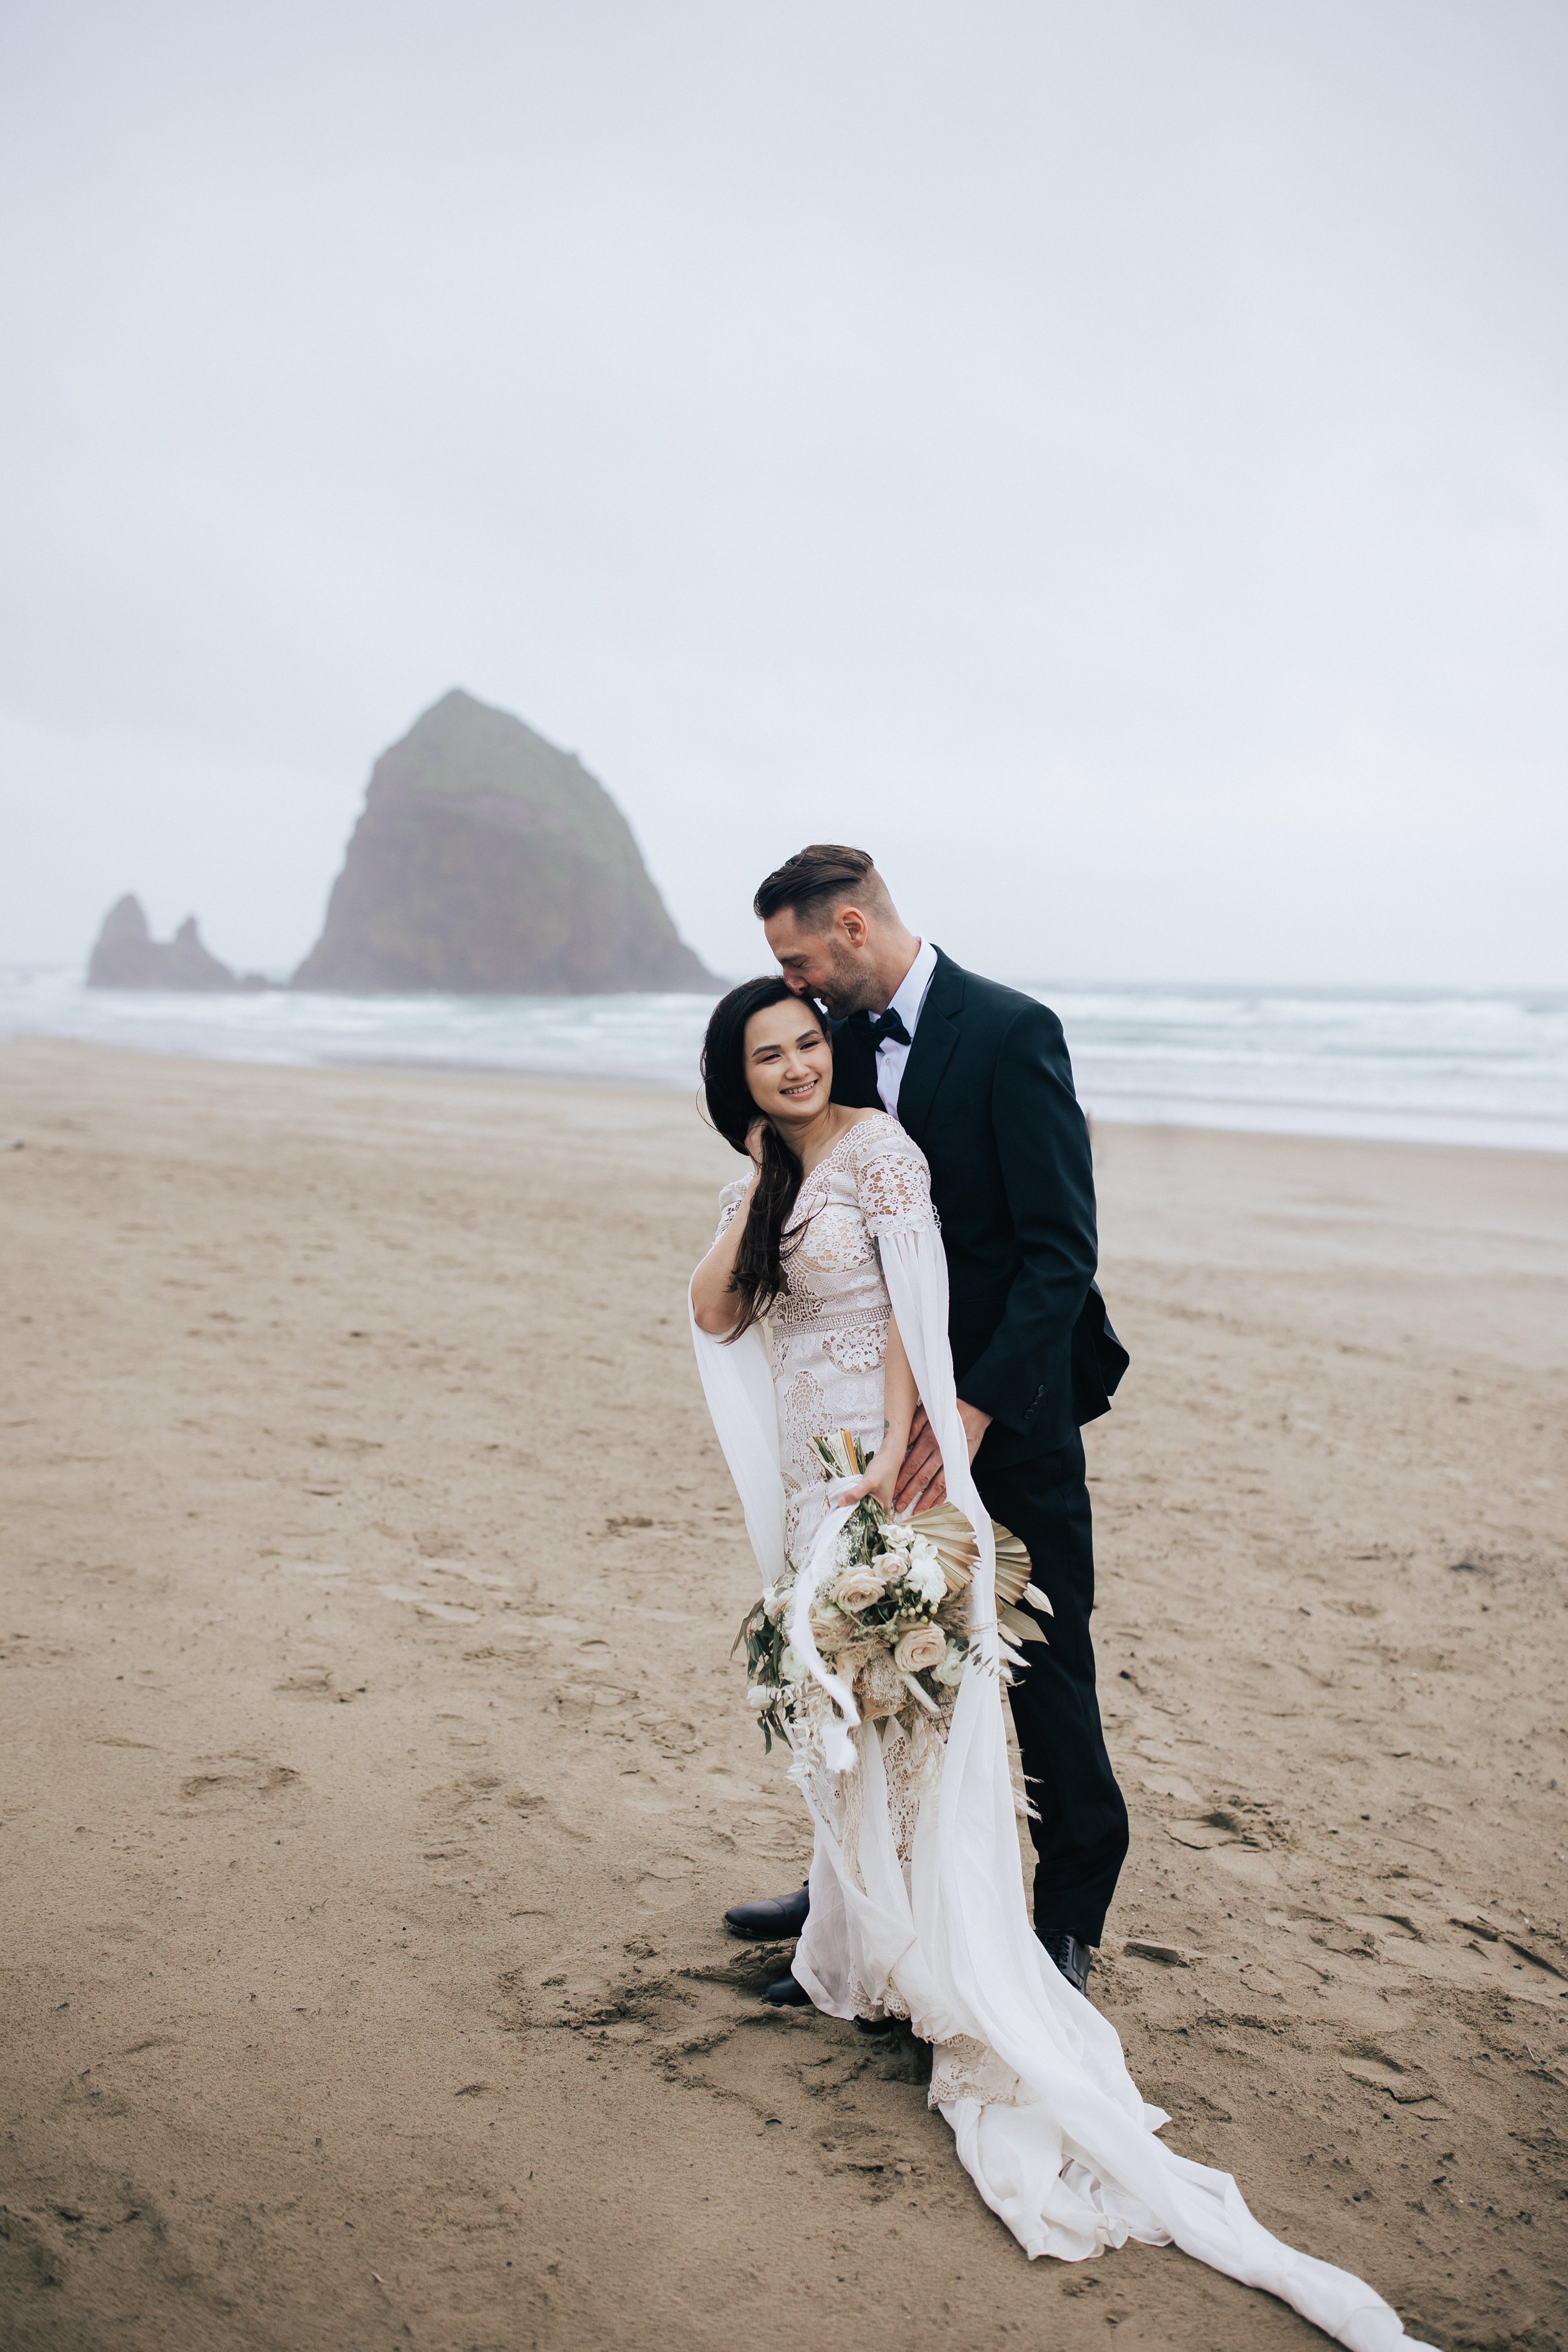  Bride and groom stand together on cannon beach in Oregon elopement photographer emily jenkins photo beach wedding overcast elopement beach sand photos pnw pacific northwest wedding photographer seaside oregon #pnw #pnwwedding #pnwelopement #cannonbe